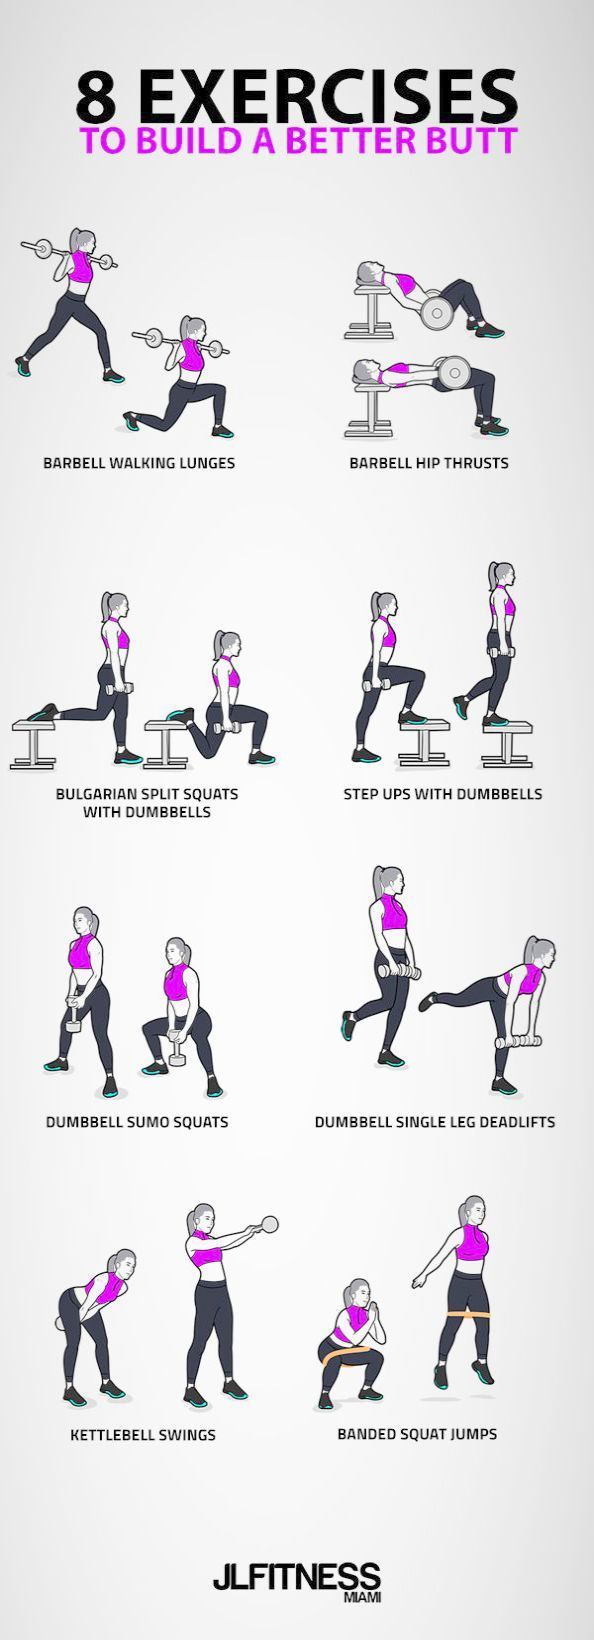 11 fitness Workouts for men ideas